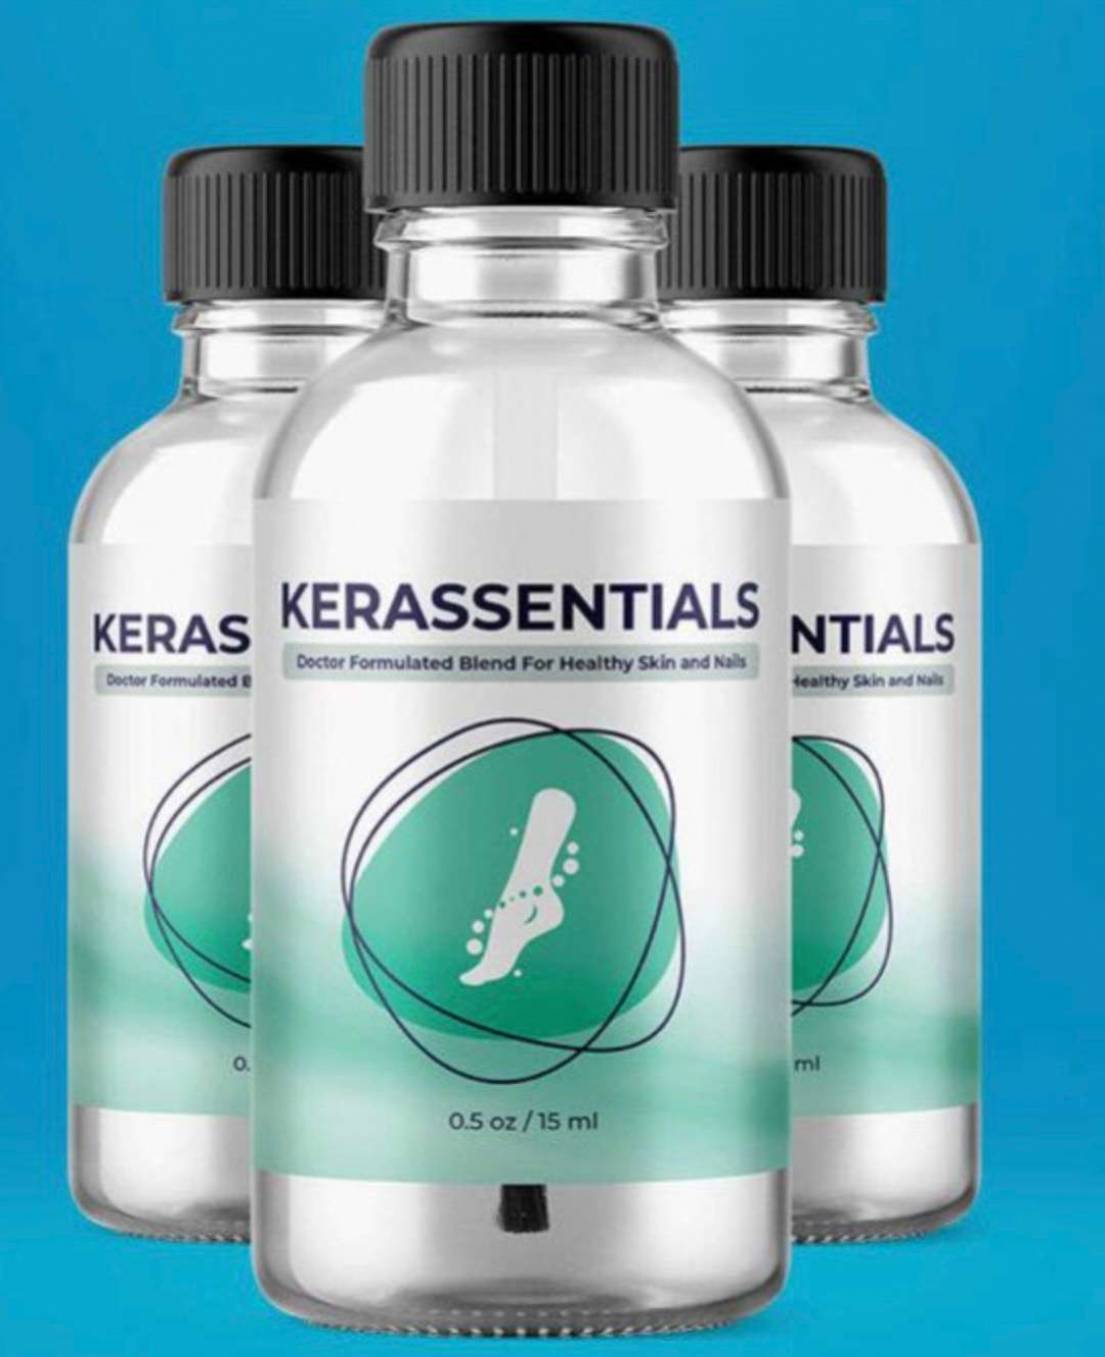 What Is The Best Place To Get Kerassentials